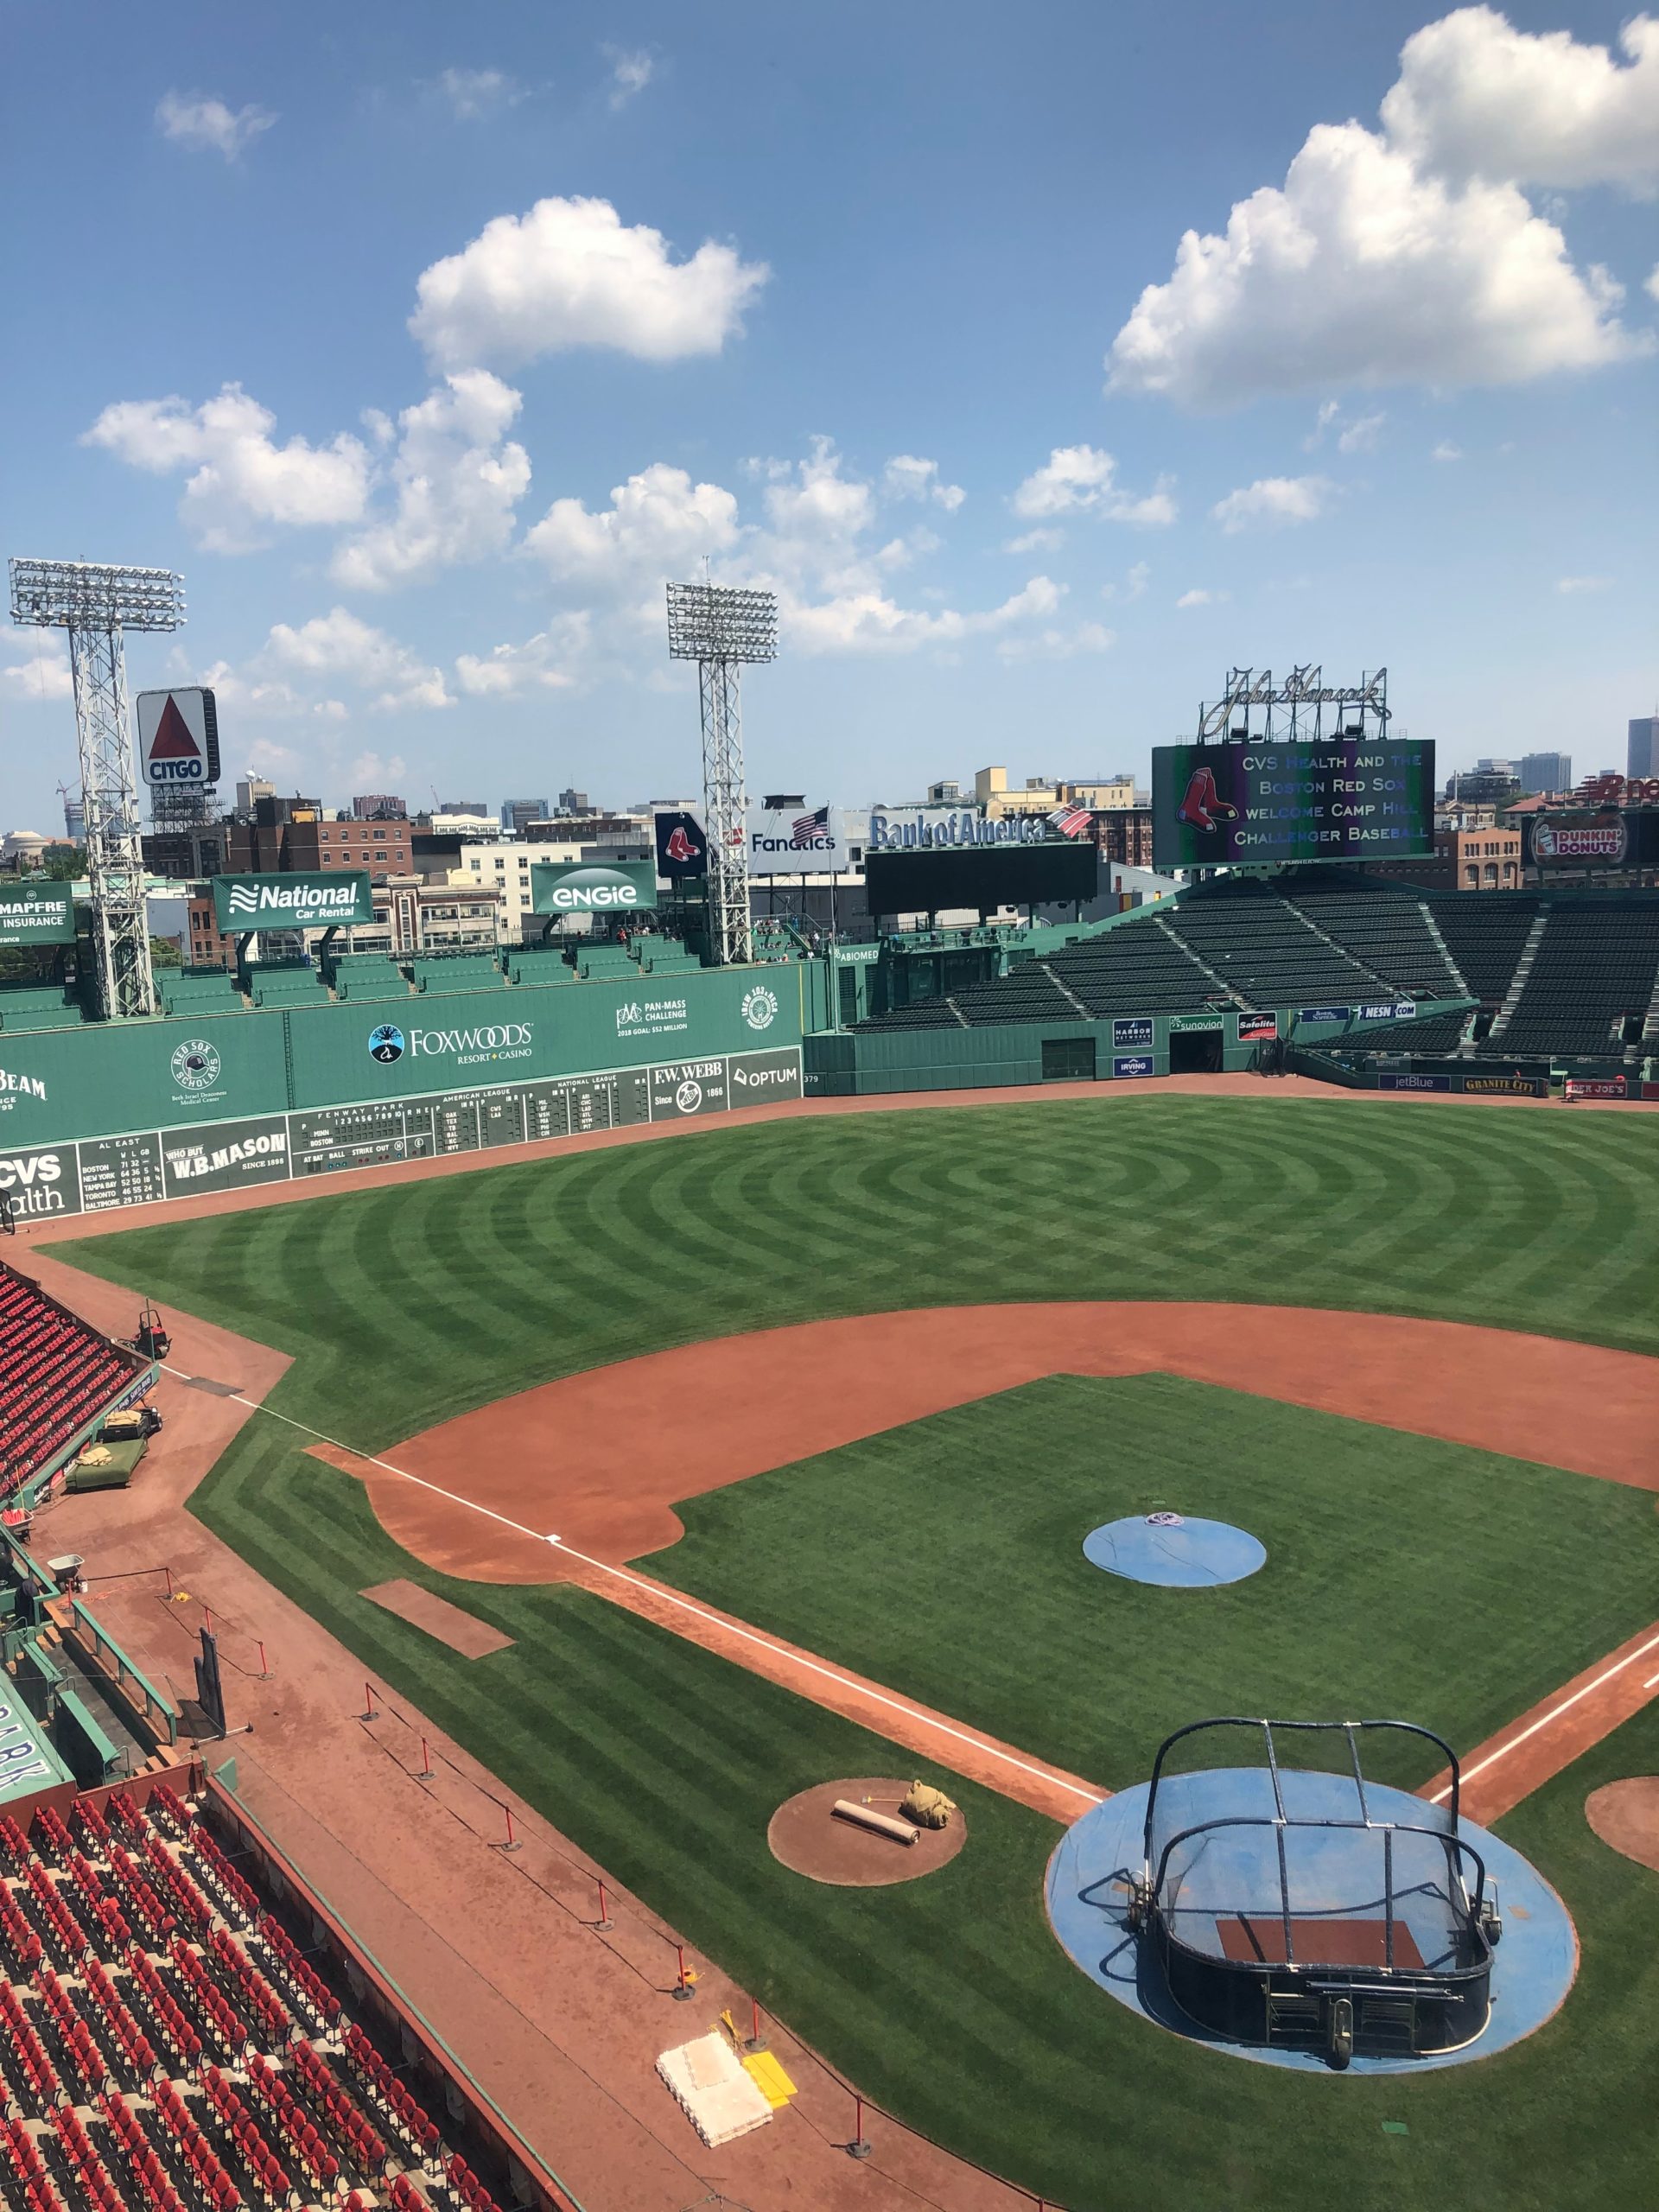 The Baseball Field Isn't the Only Thing Green at Fenway Park